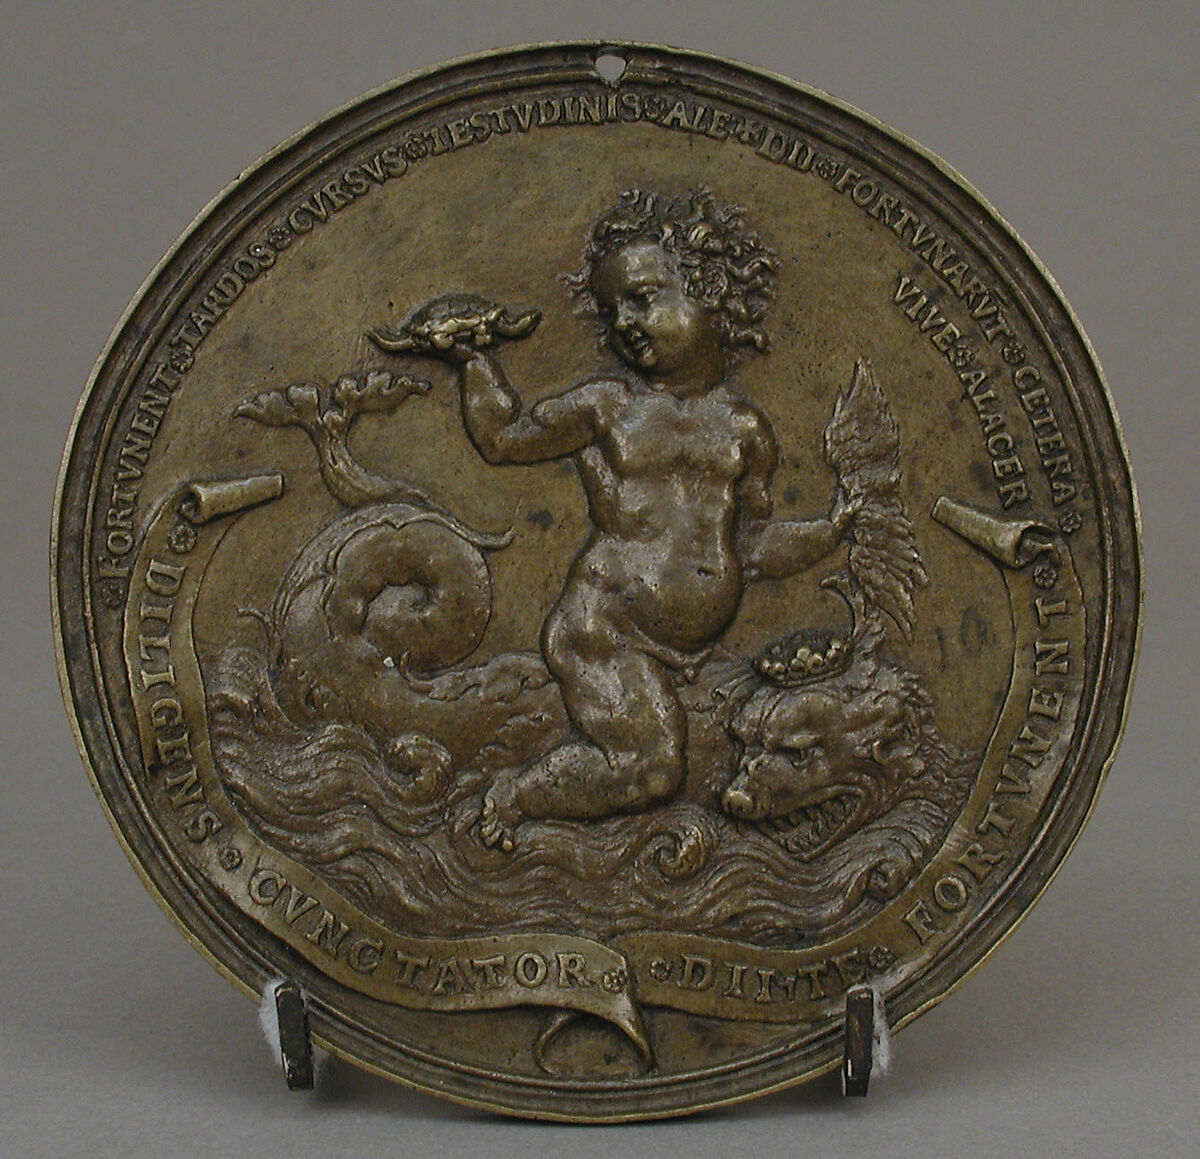 Commemoration of the Visit of the Dauphin Francis, Son of Francis I, to the City of Lyon in 1533, Medalist: Jacques Gauvain (active ca. 1501–47), Bronze, light brown patina, cast, French, Lyon 